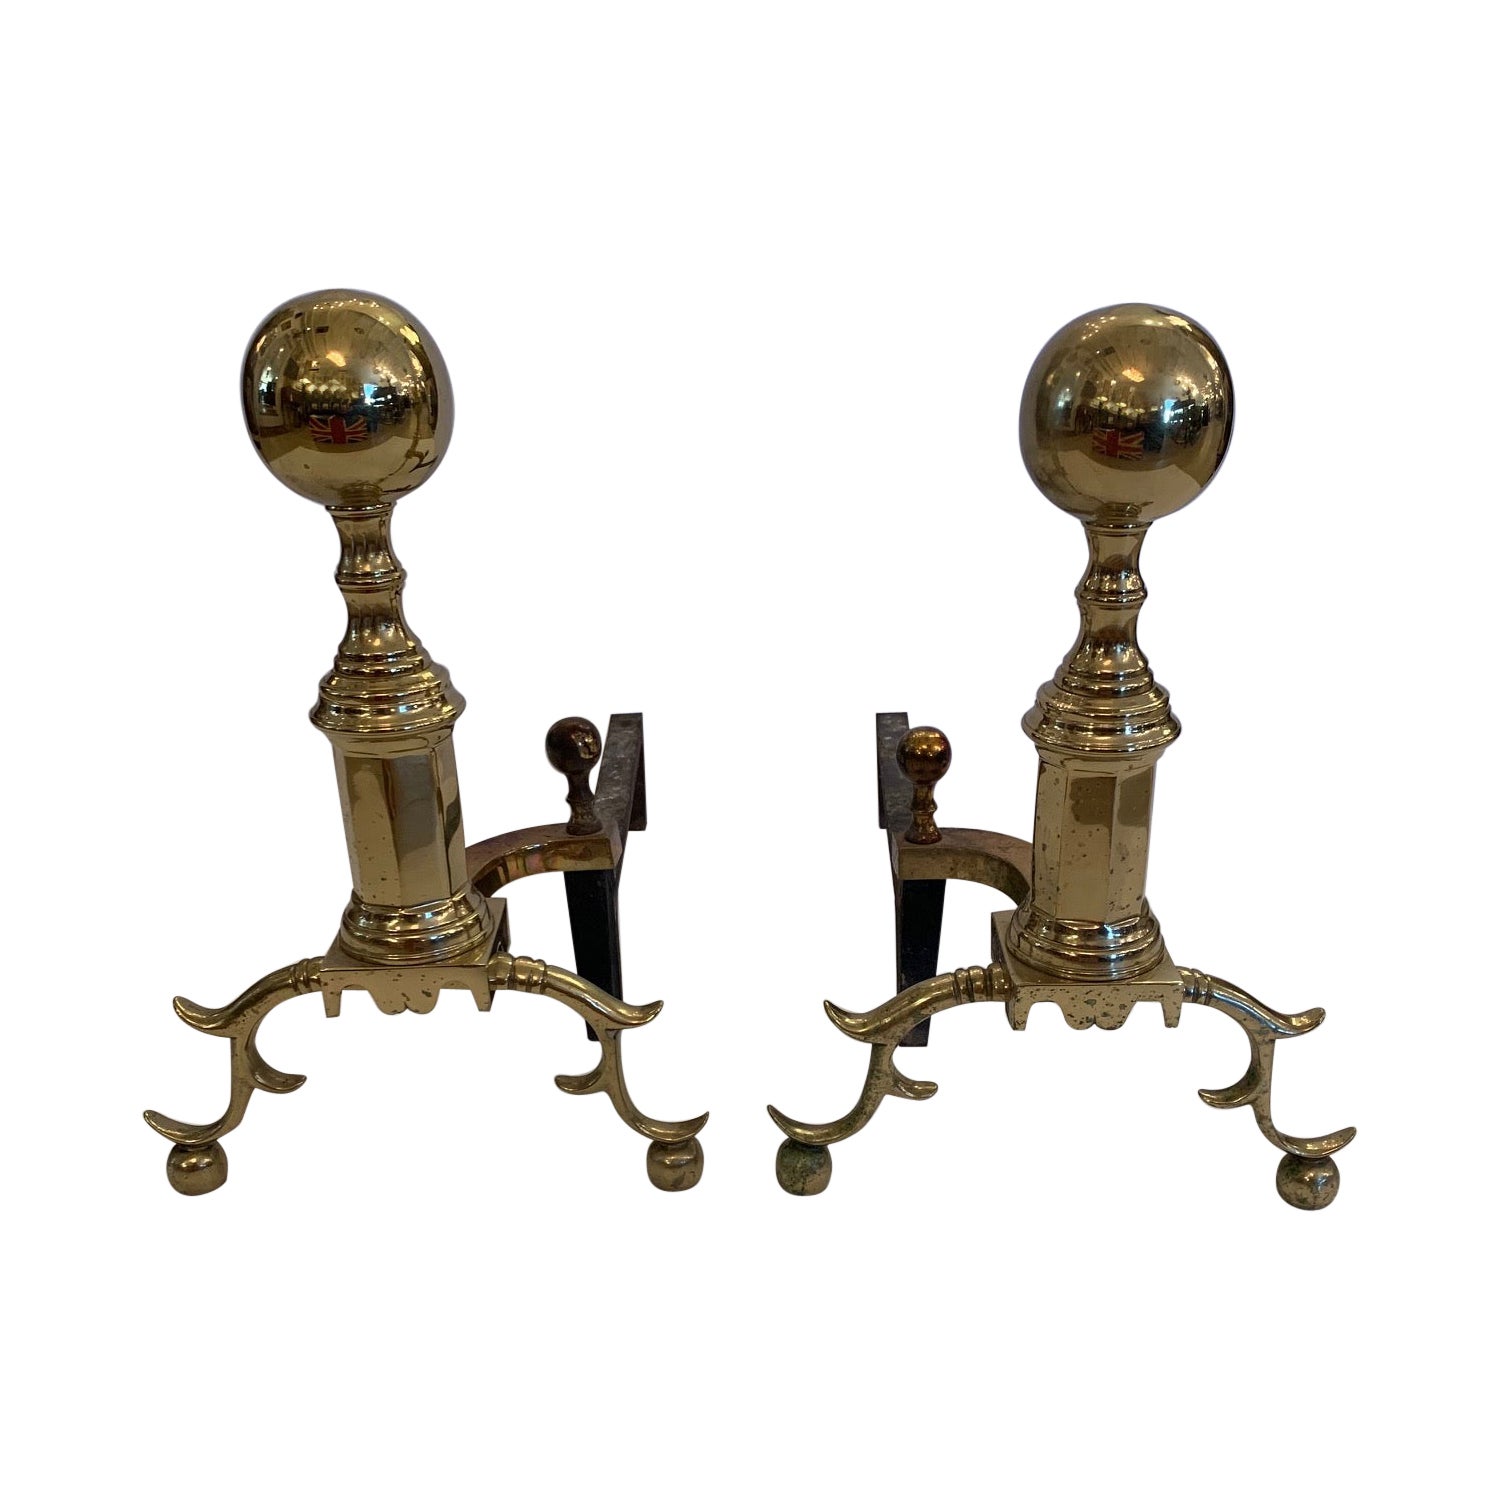 Classic Pair of Cast Brass Cannonball Designed Vintage Andirons